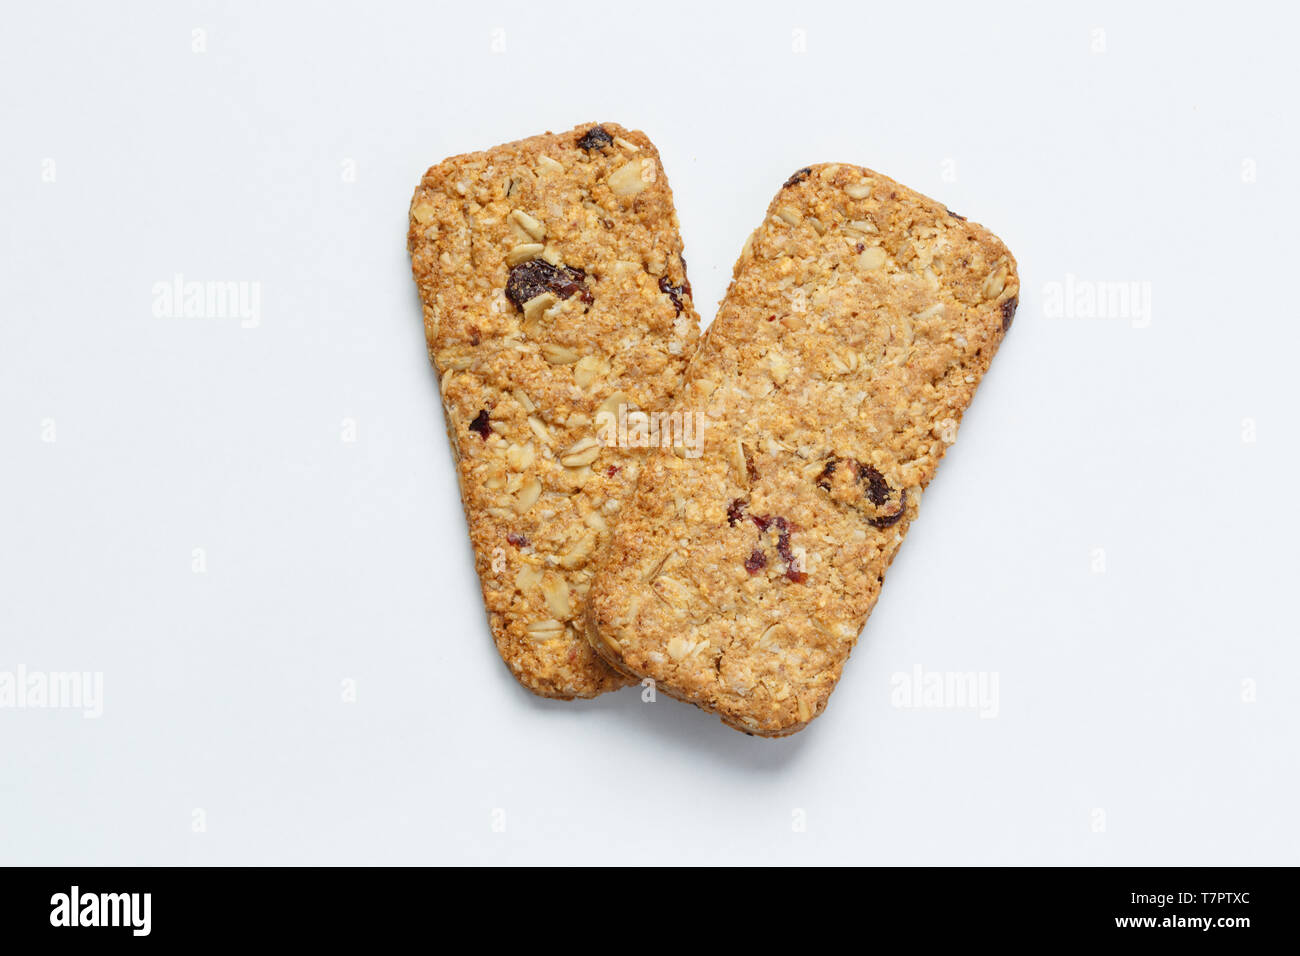 High angle view of two multigrain cookies isolated on white background. Stock Photo